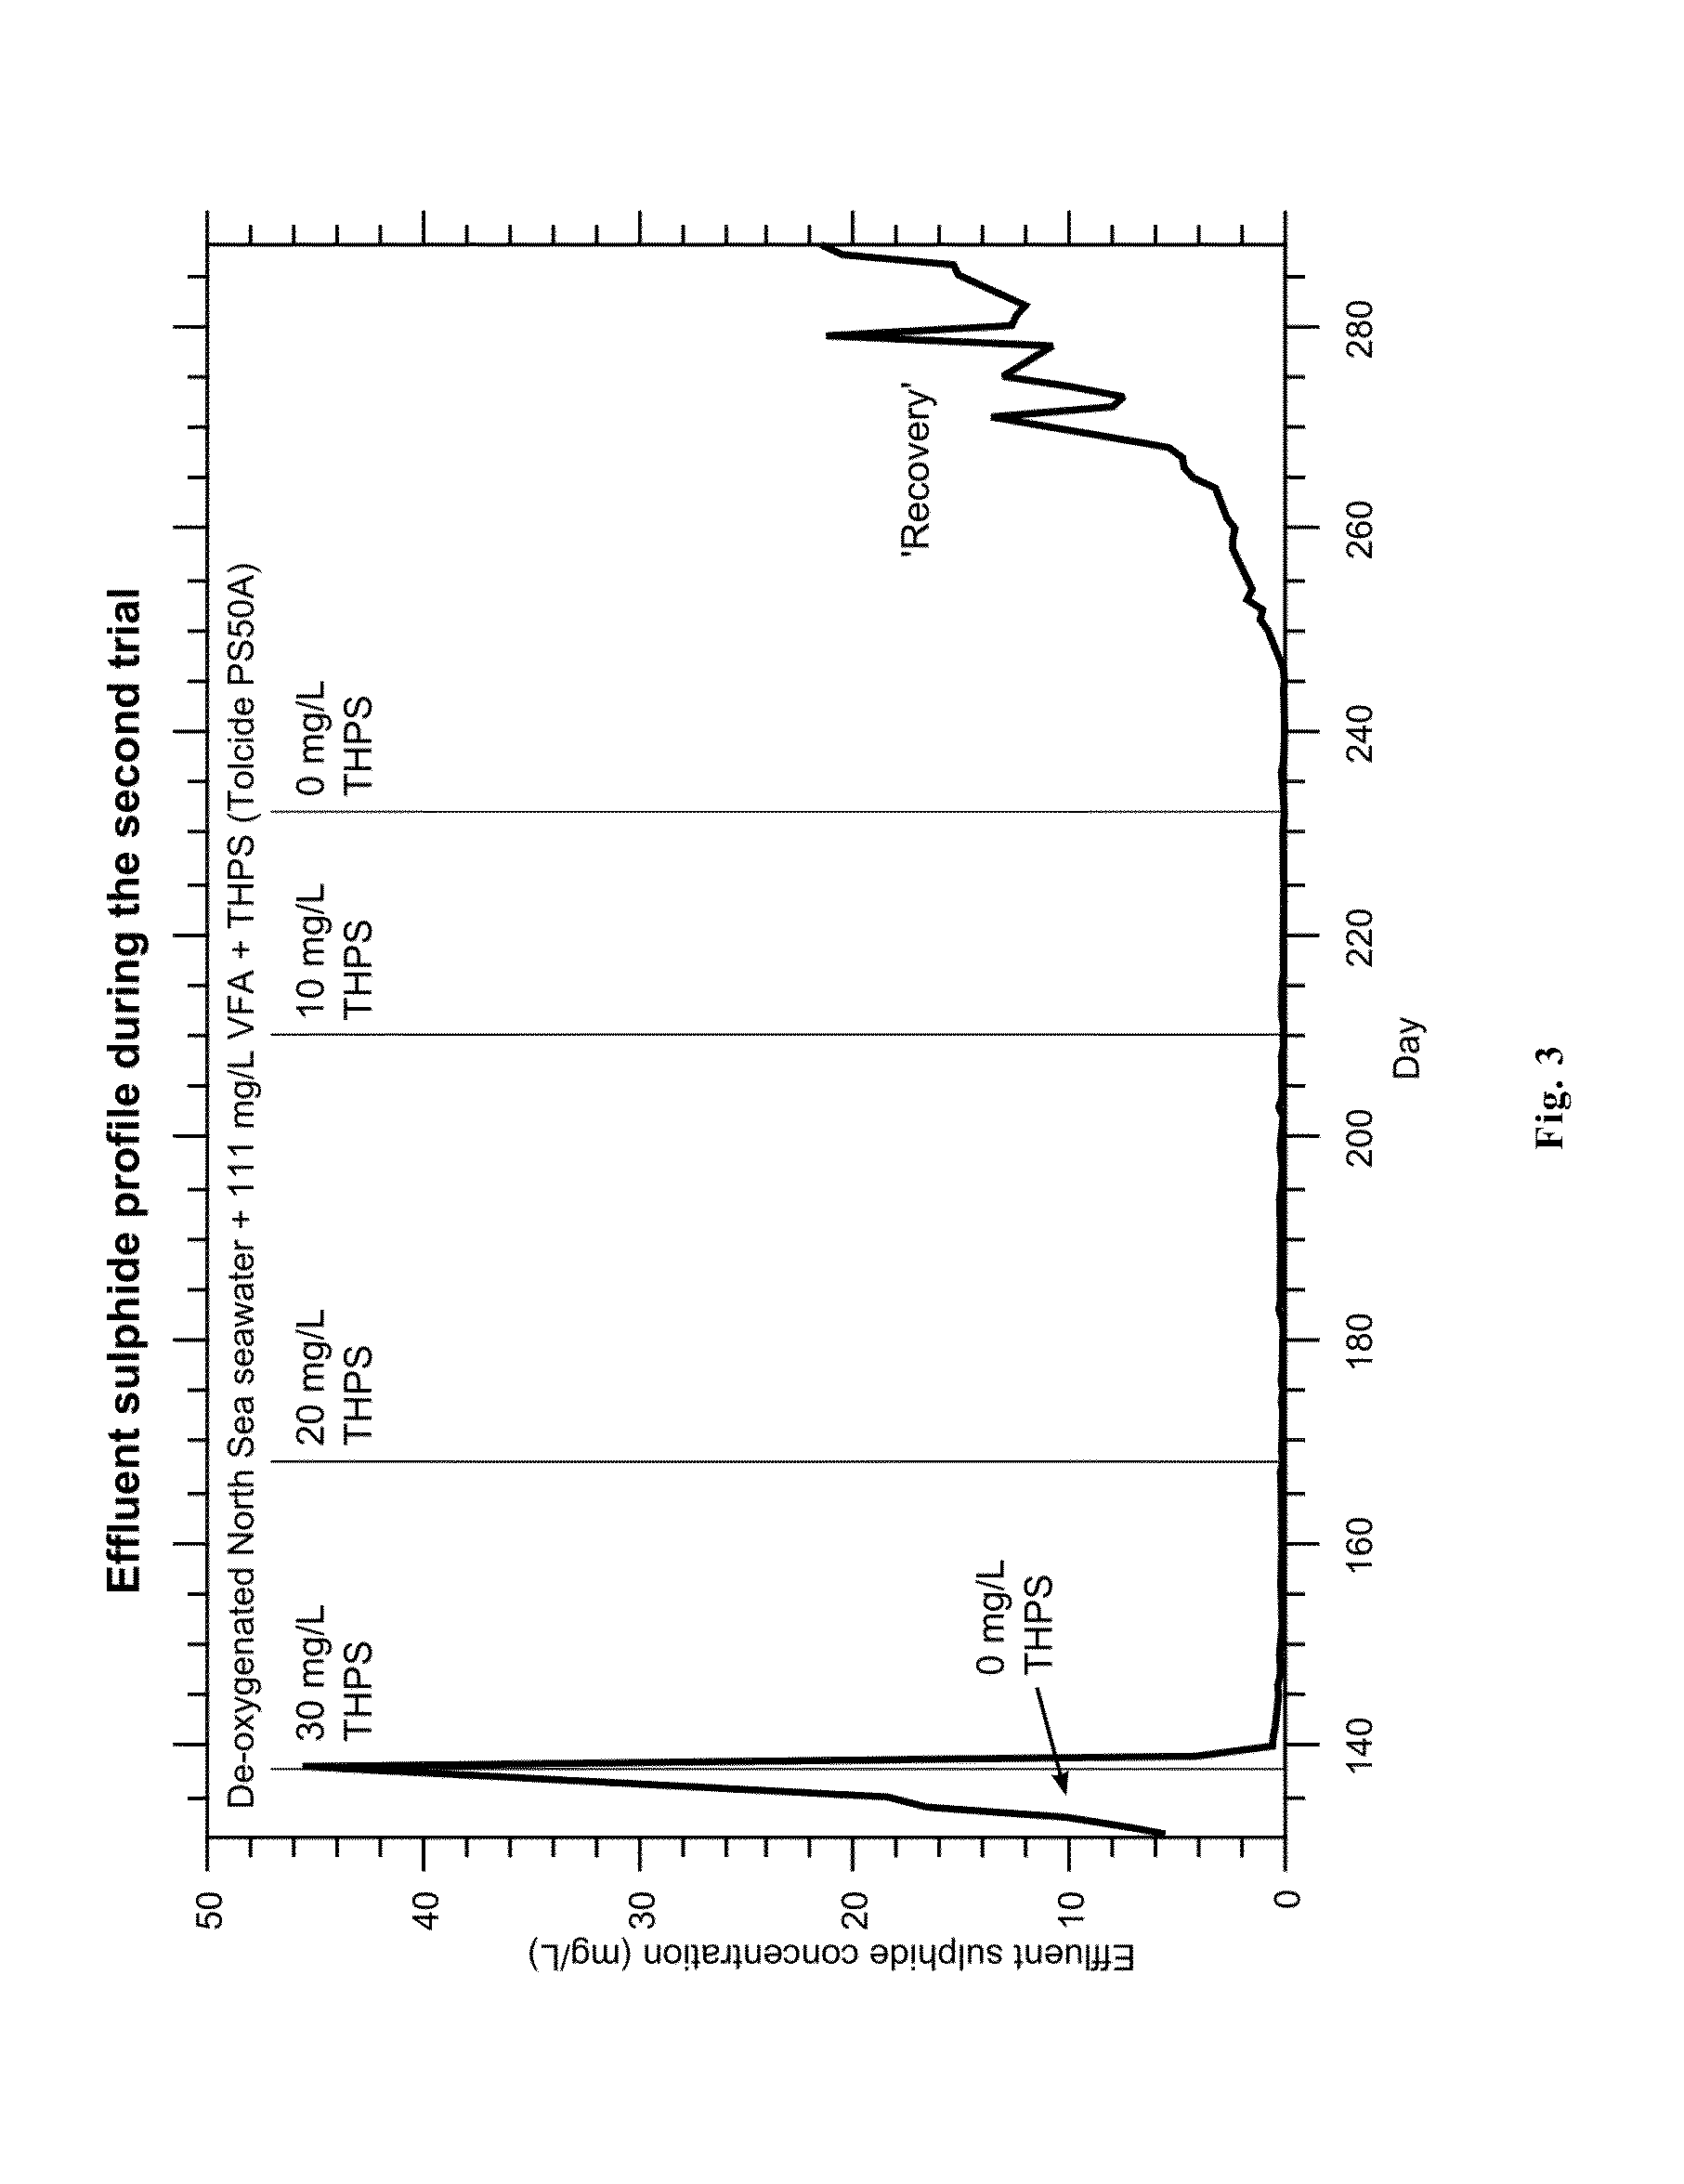 Treatment method for a hydrocarbon-containing system using a biocide